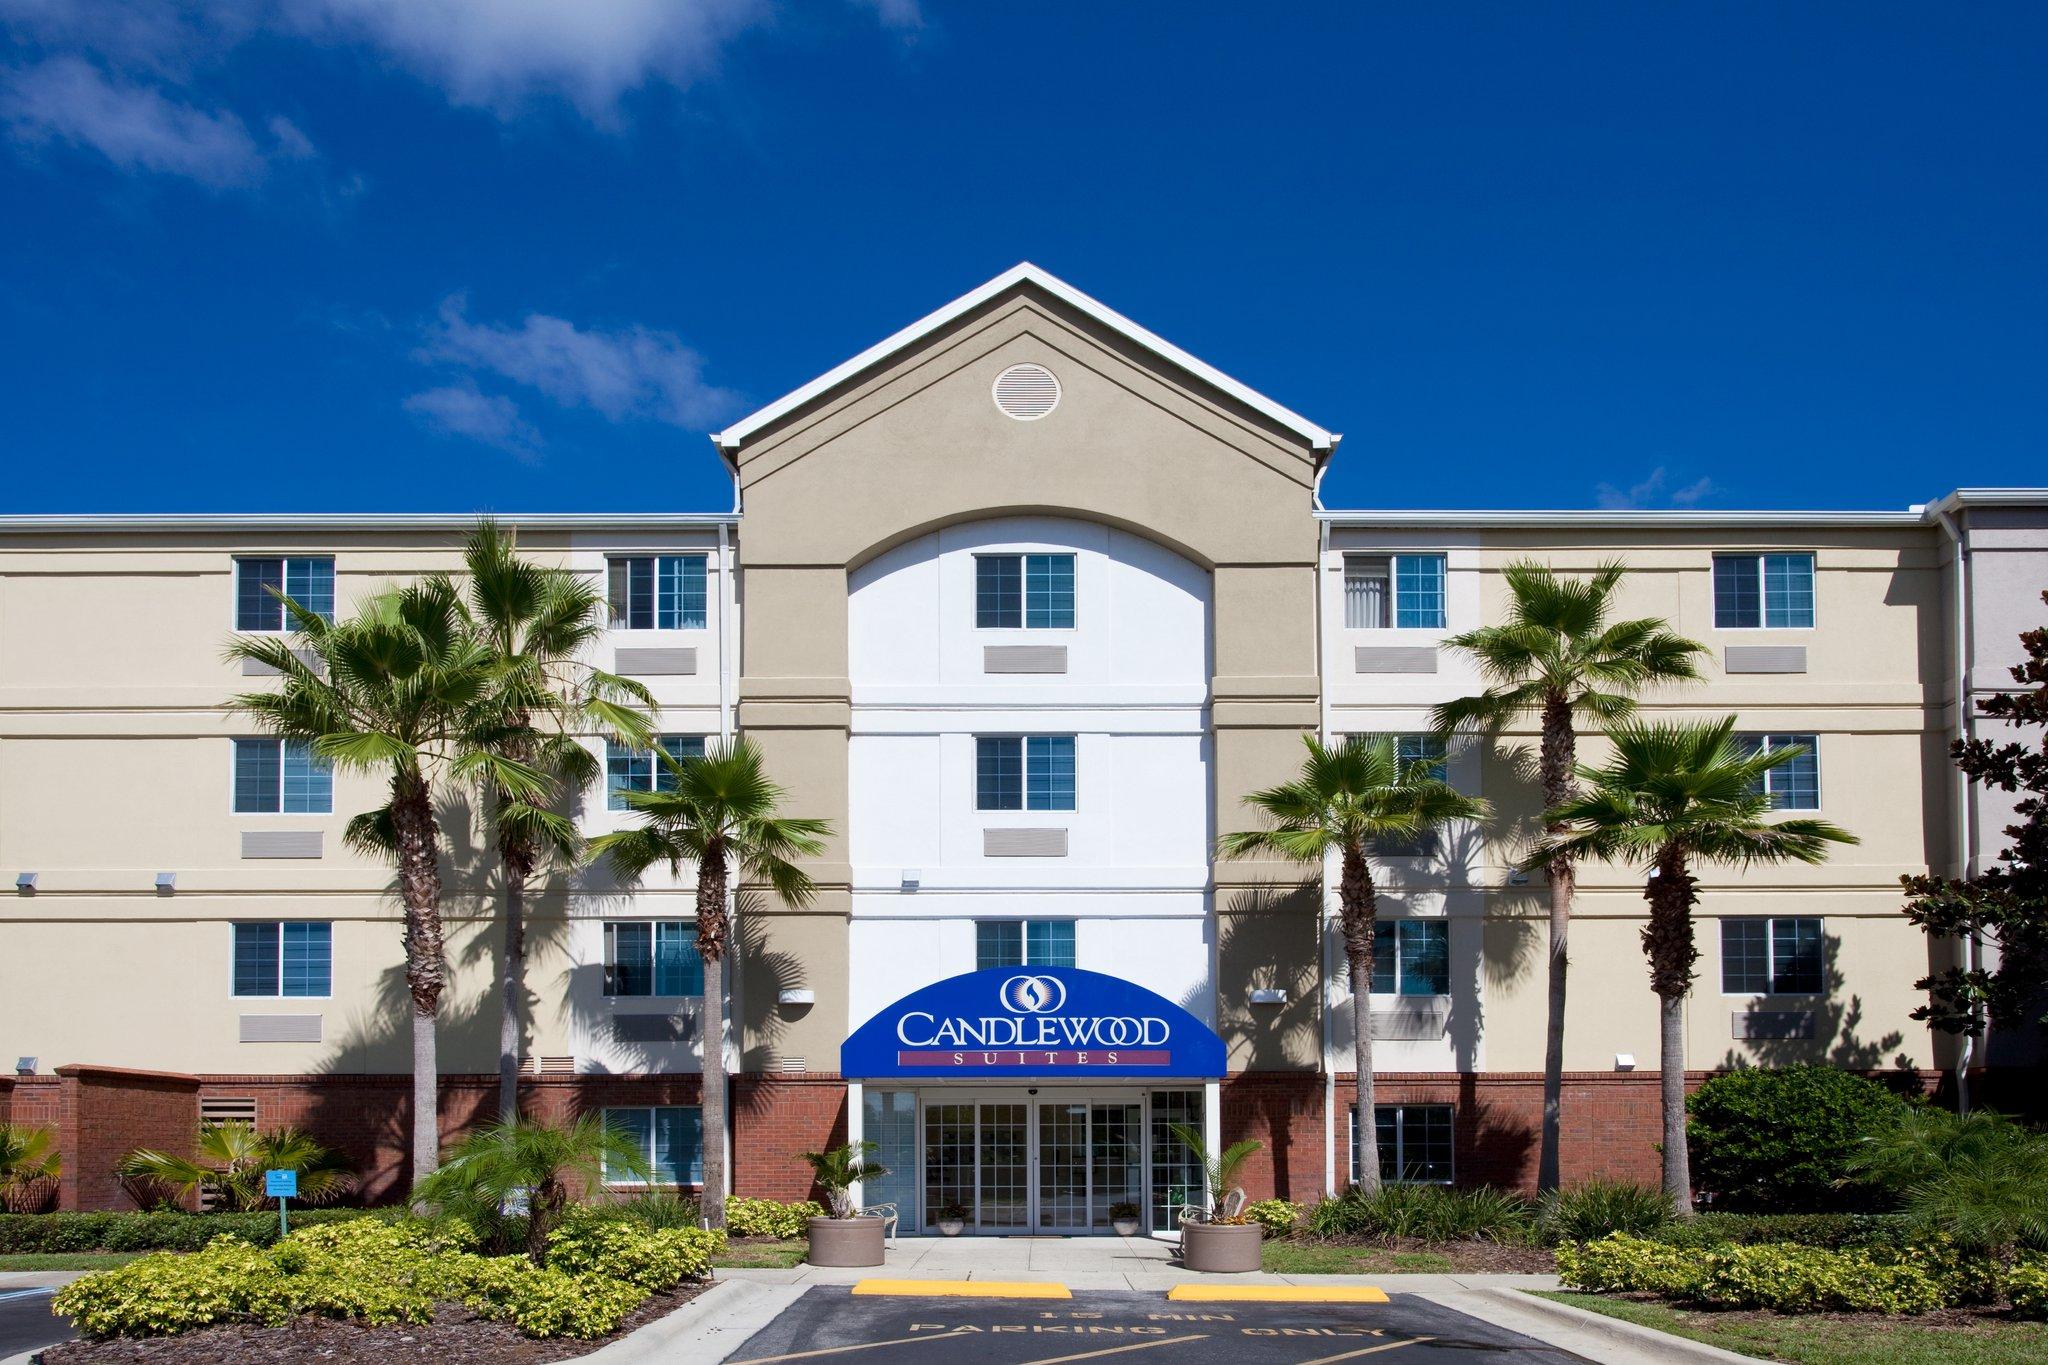 Candlewood Suites Lake Mary in Lake Mary, FL